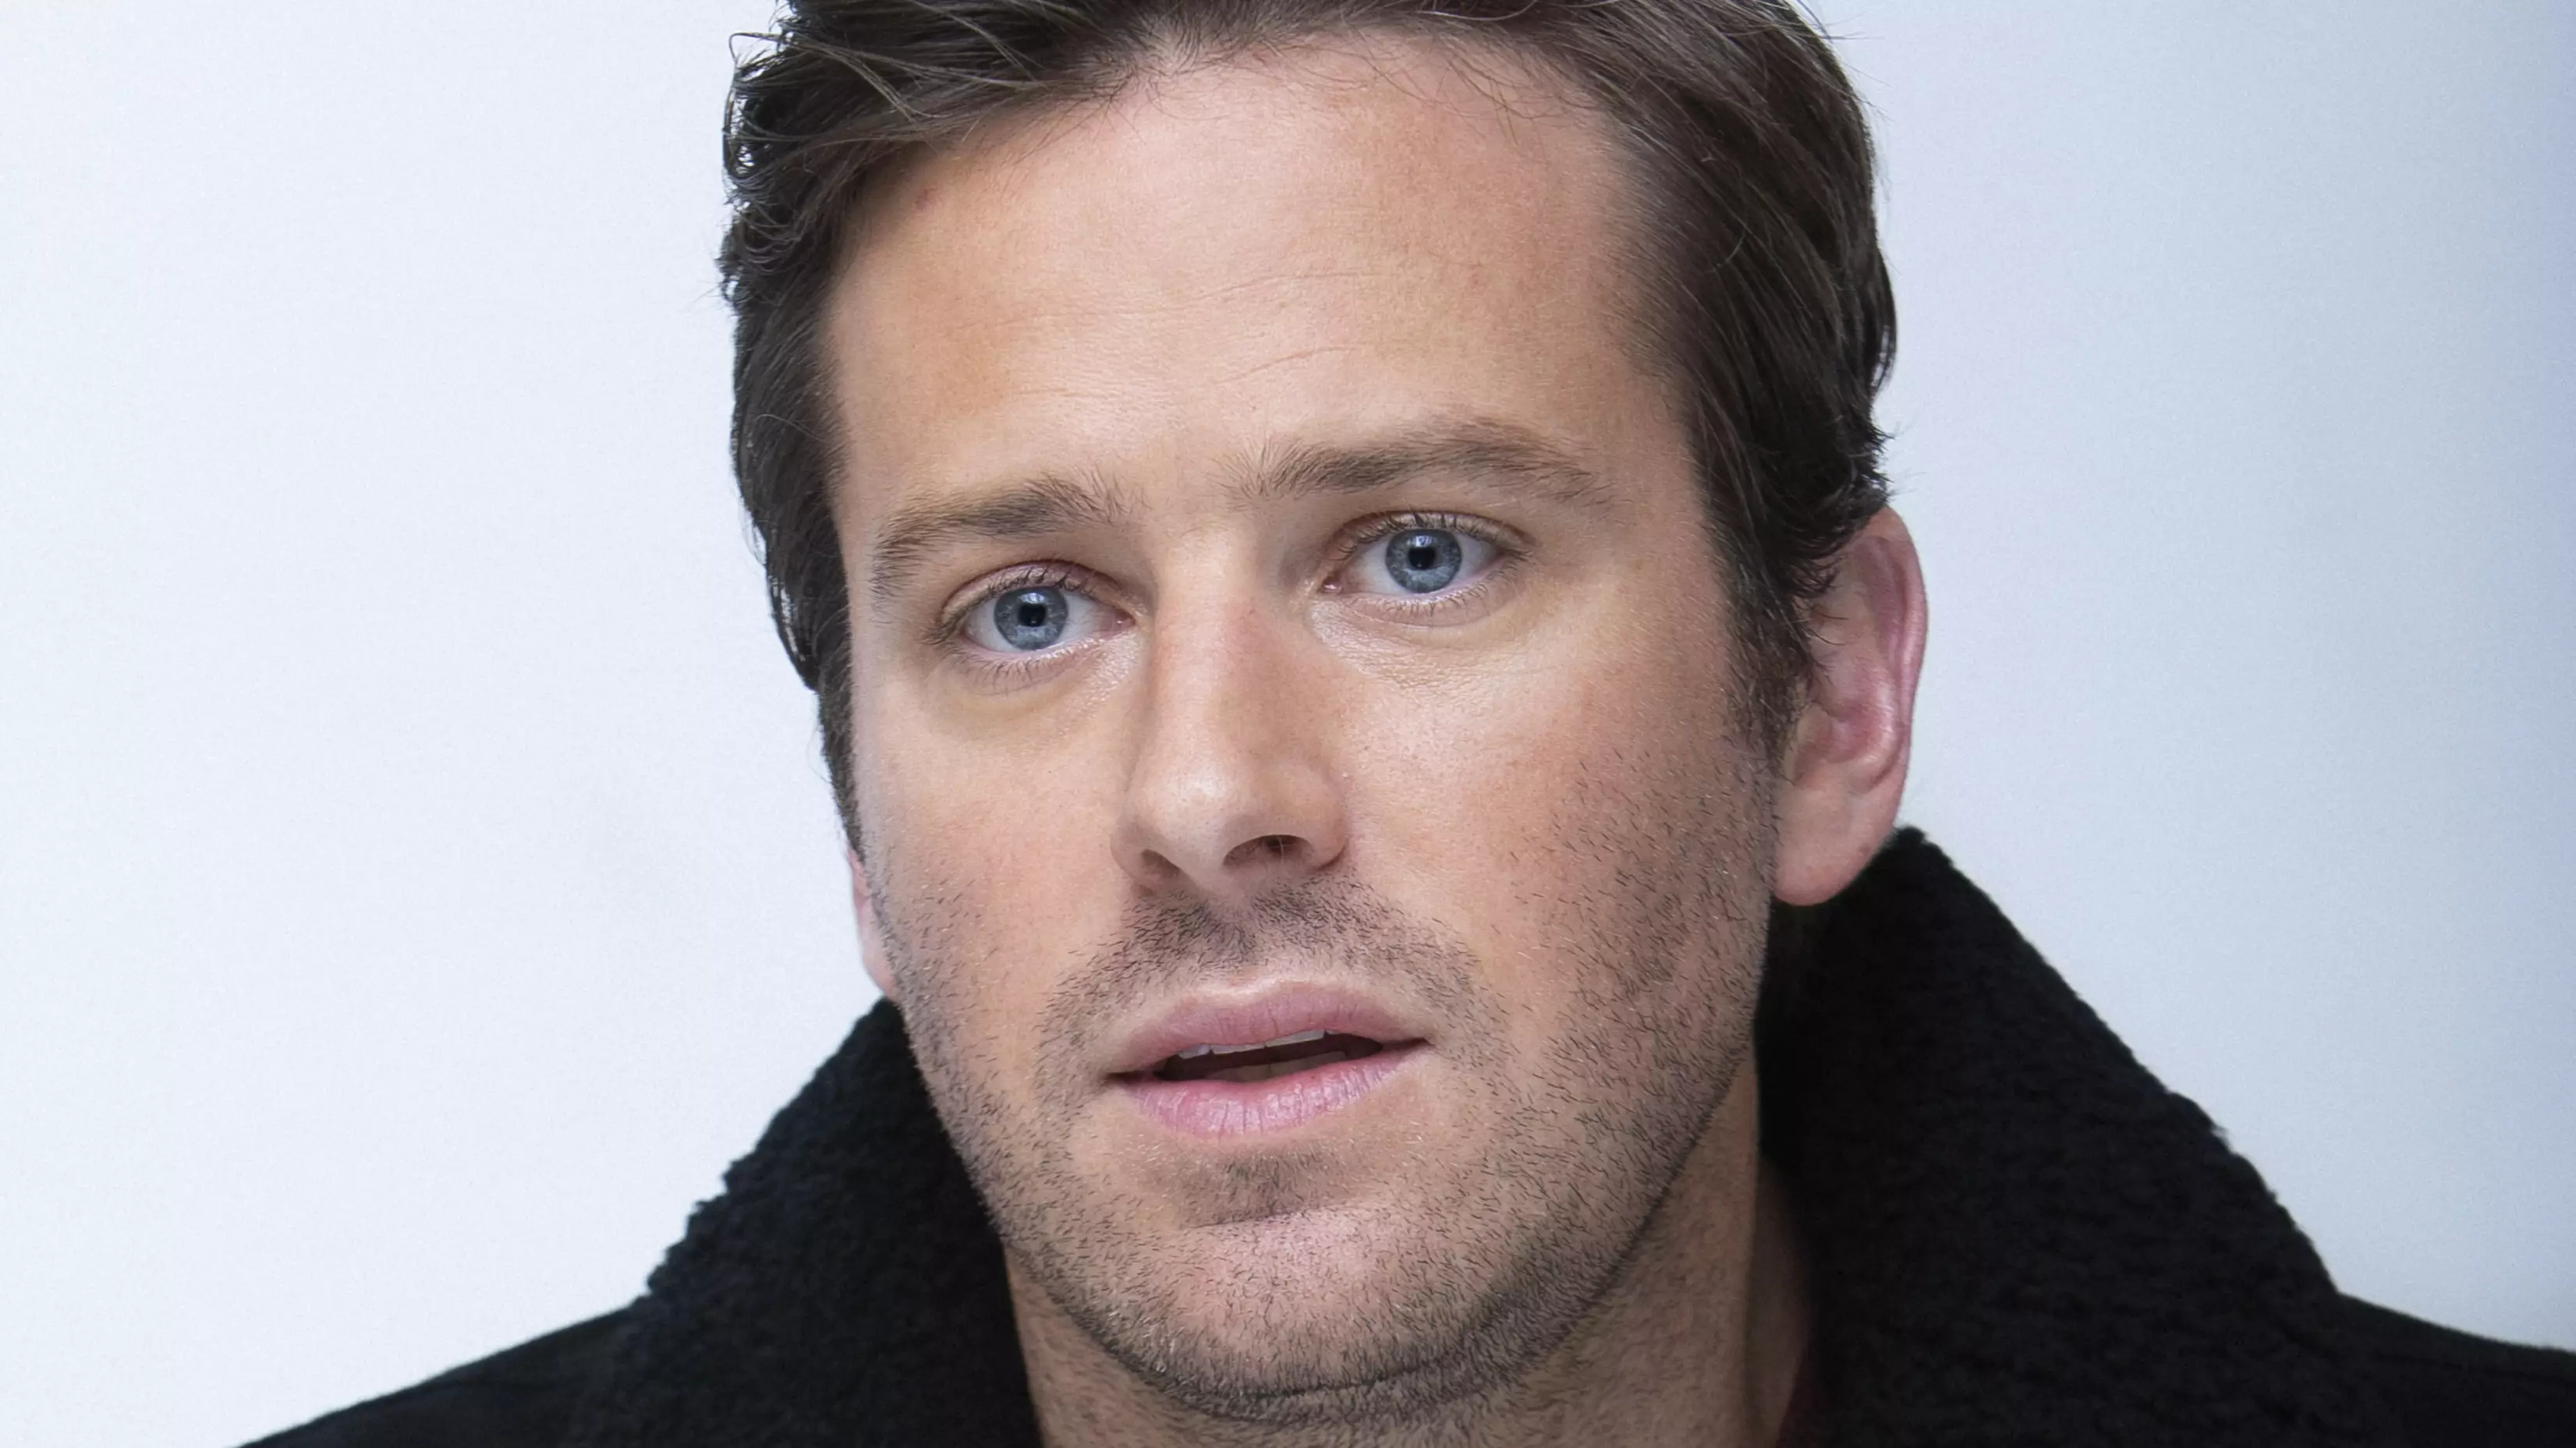 Armie Hammer Finally Breaks His Silence Over Alleged Graphic Instagram DMs